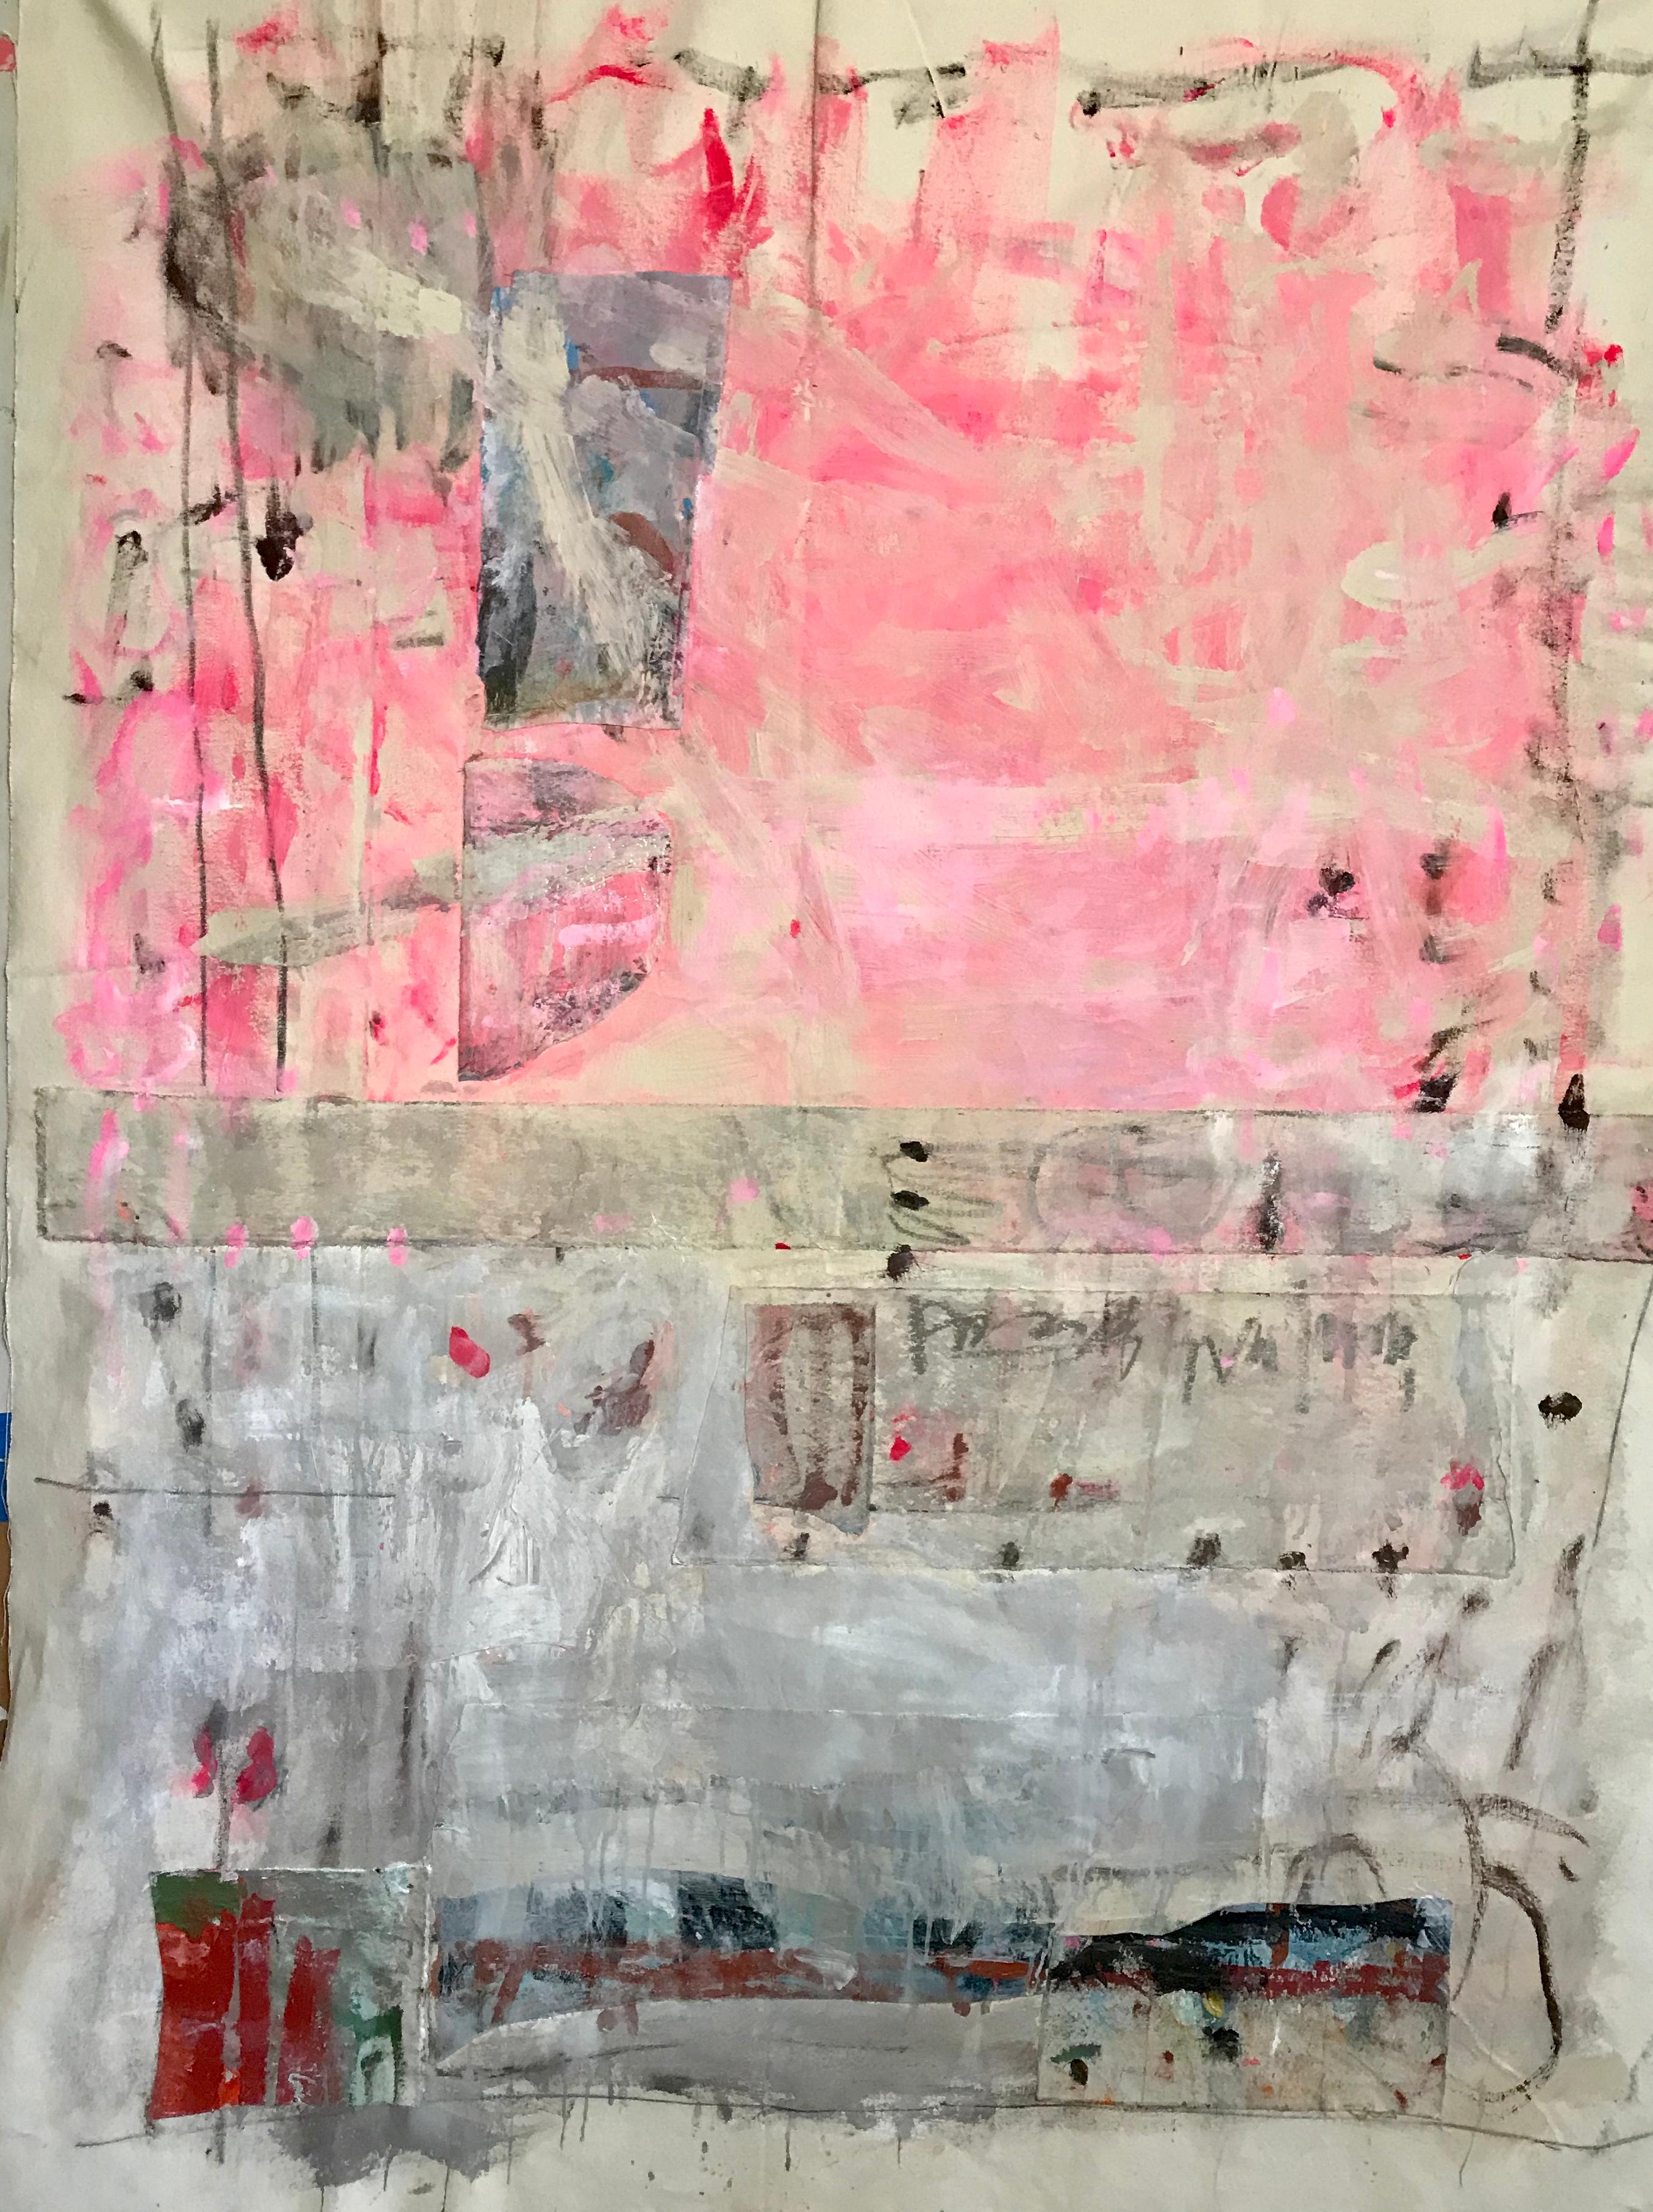 Ashley Chase Andrews Abstract Painting - Pink Handwriting, Abstract Acrylic and Charcoal on Unstretched Canvas, Signed 